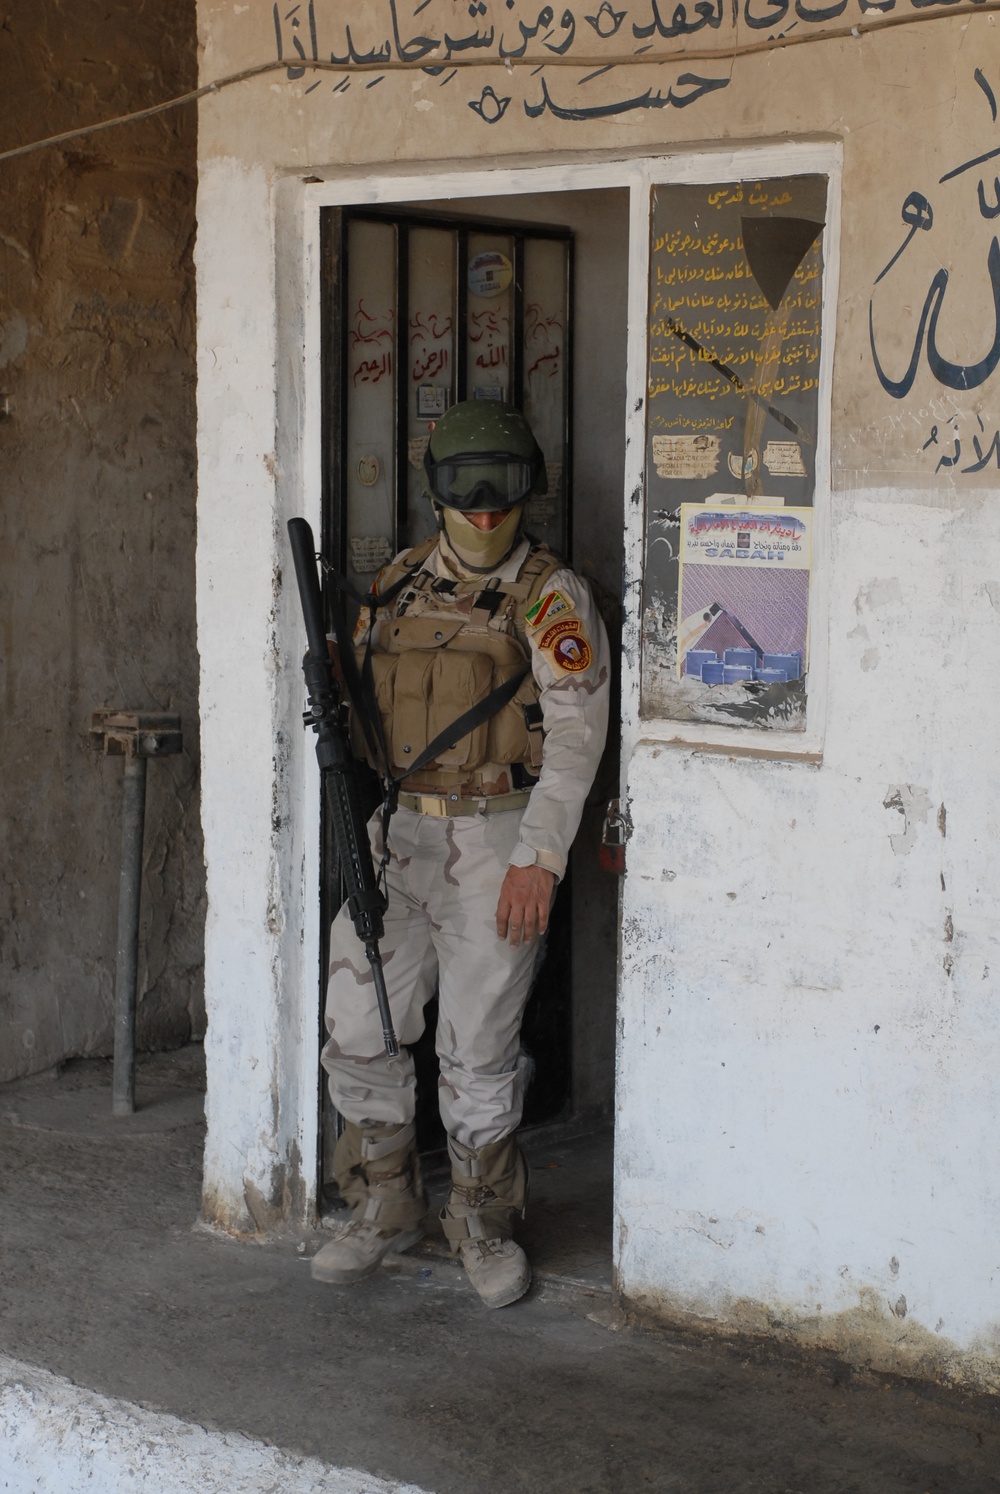 Search for weapons and explosives in Abu Ghraib, Iraq